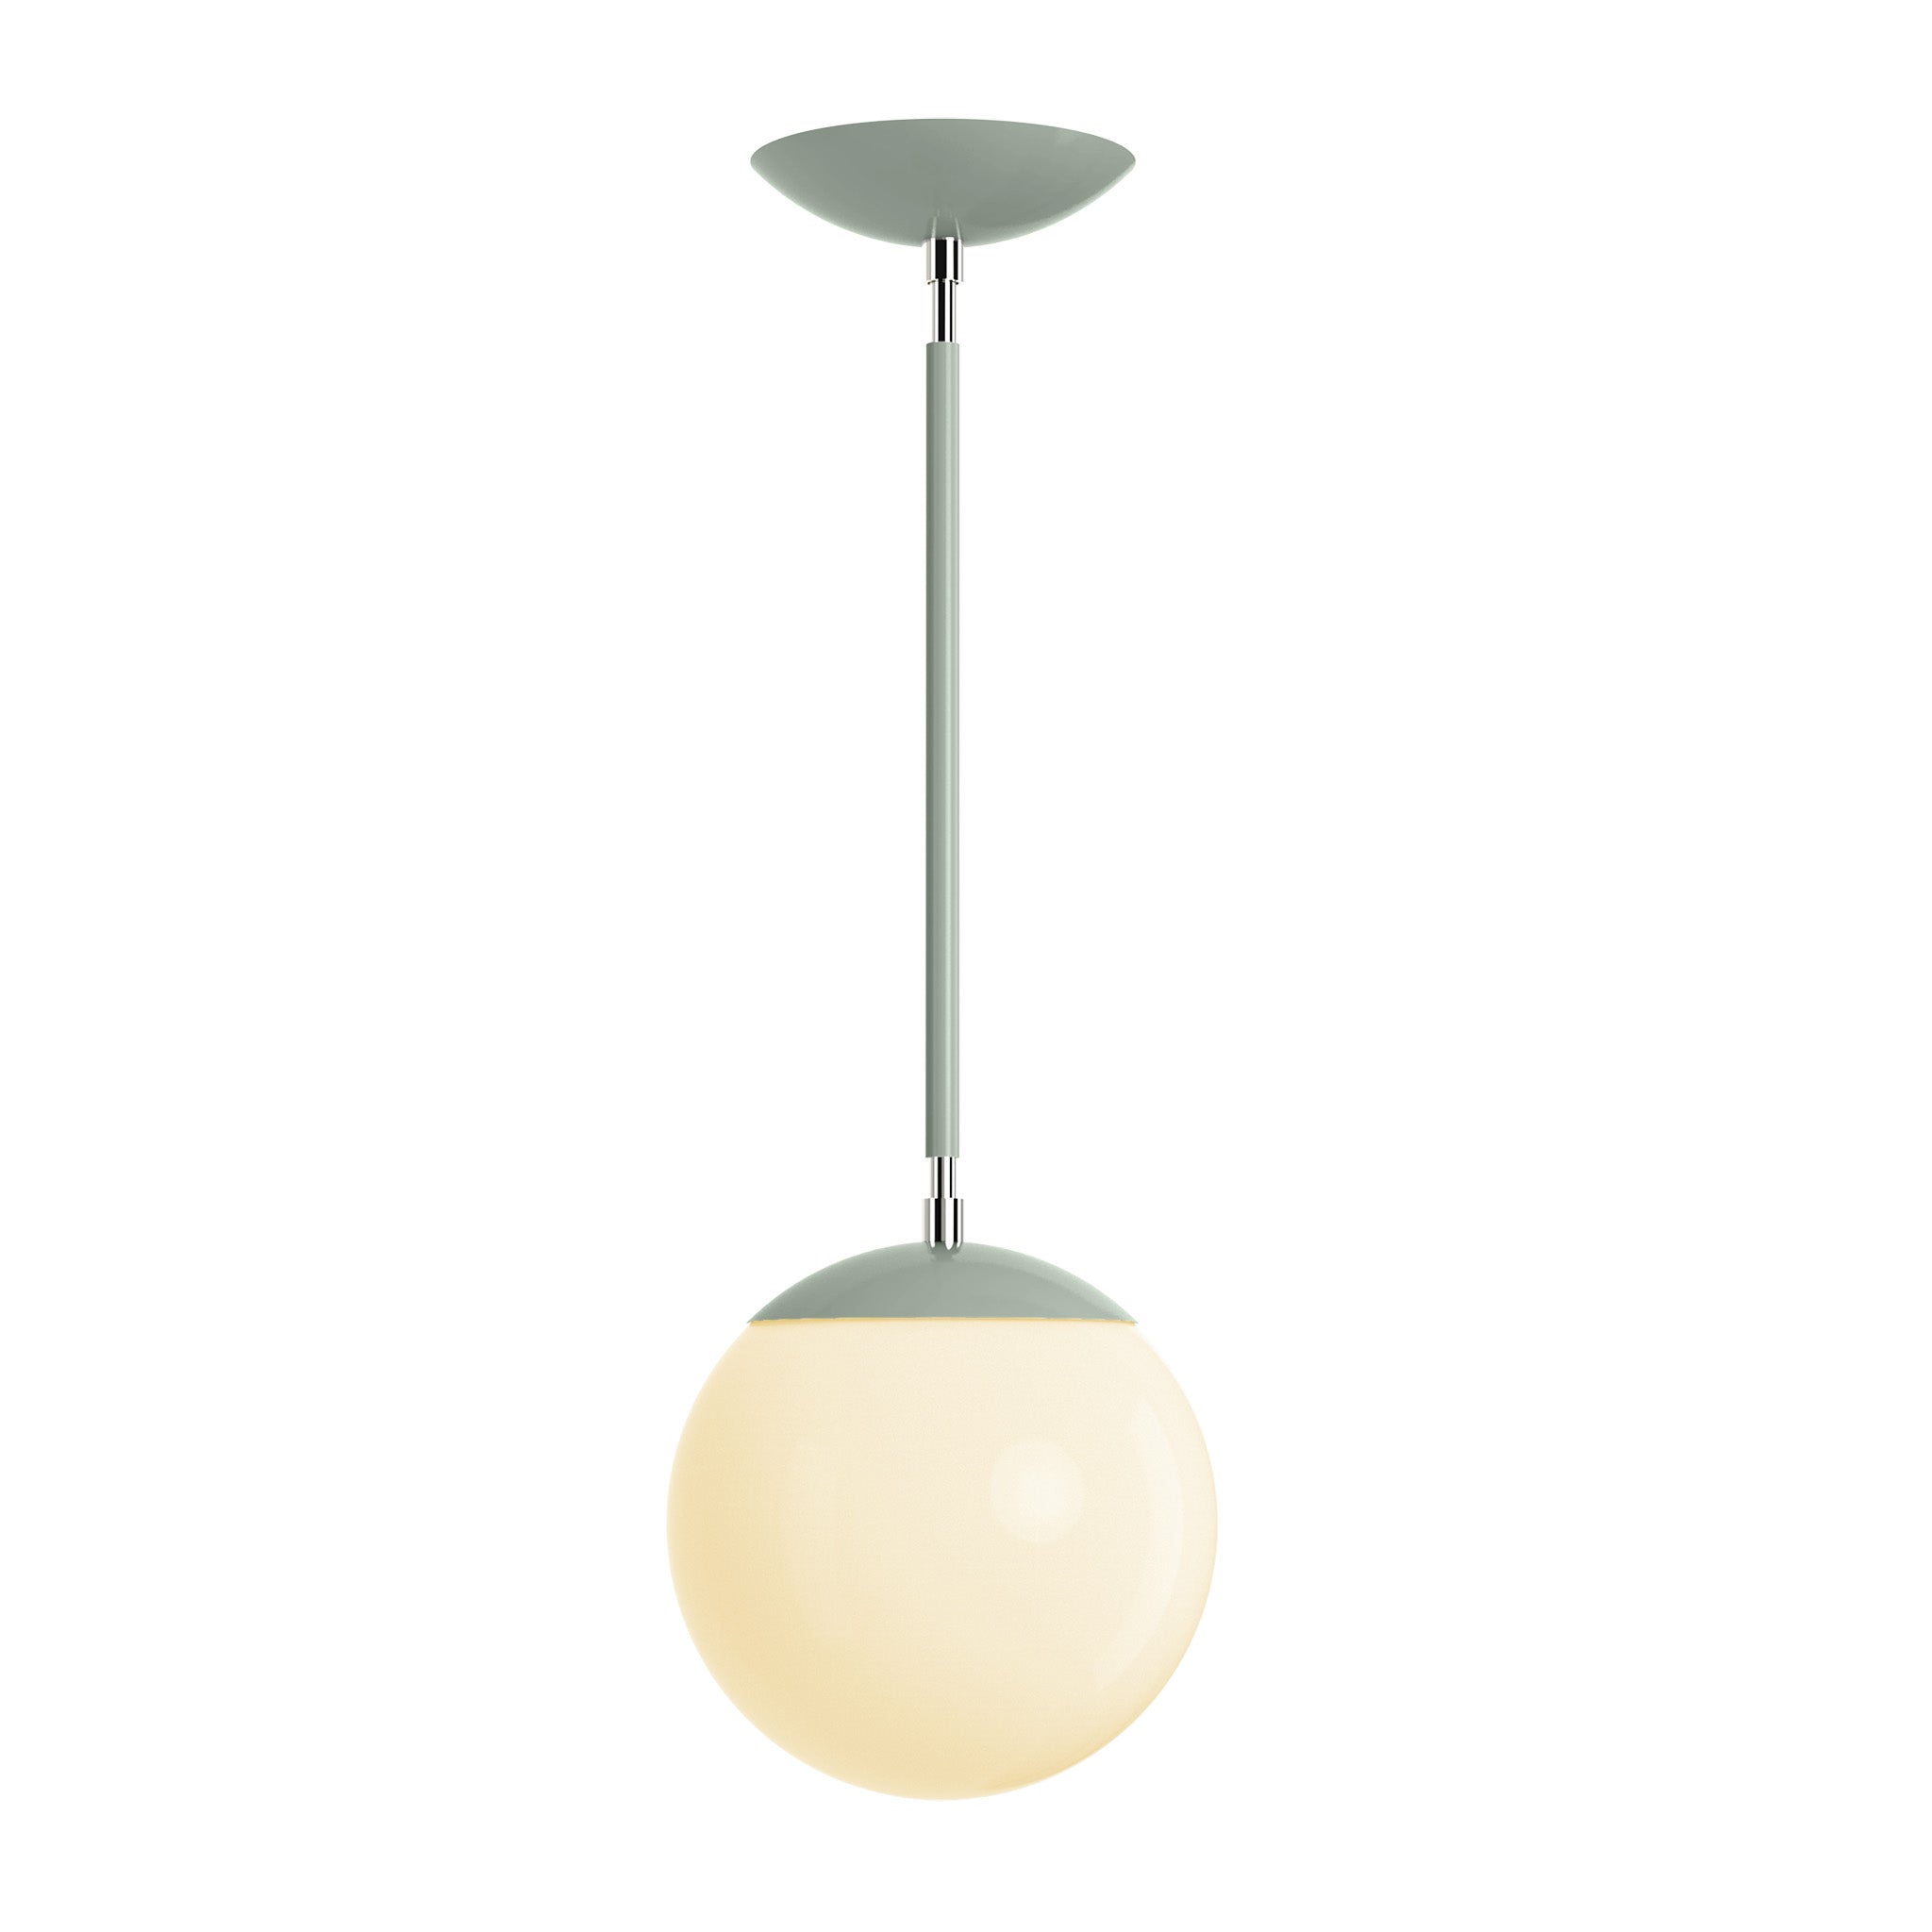 Polished nickel and spa cap globe pendant 8" dutton brown lighting